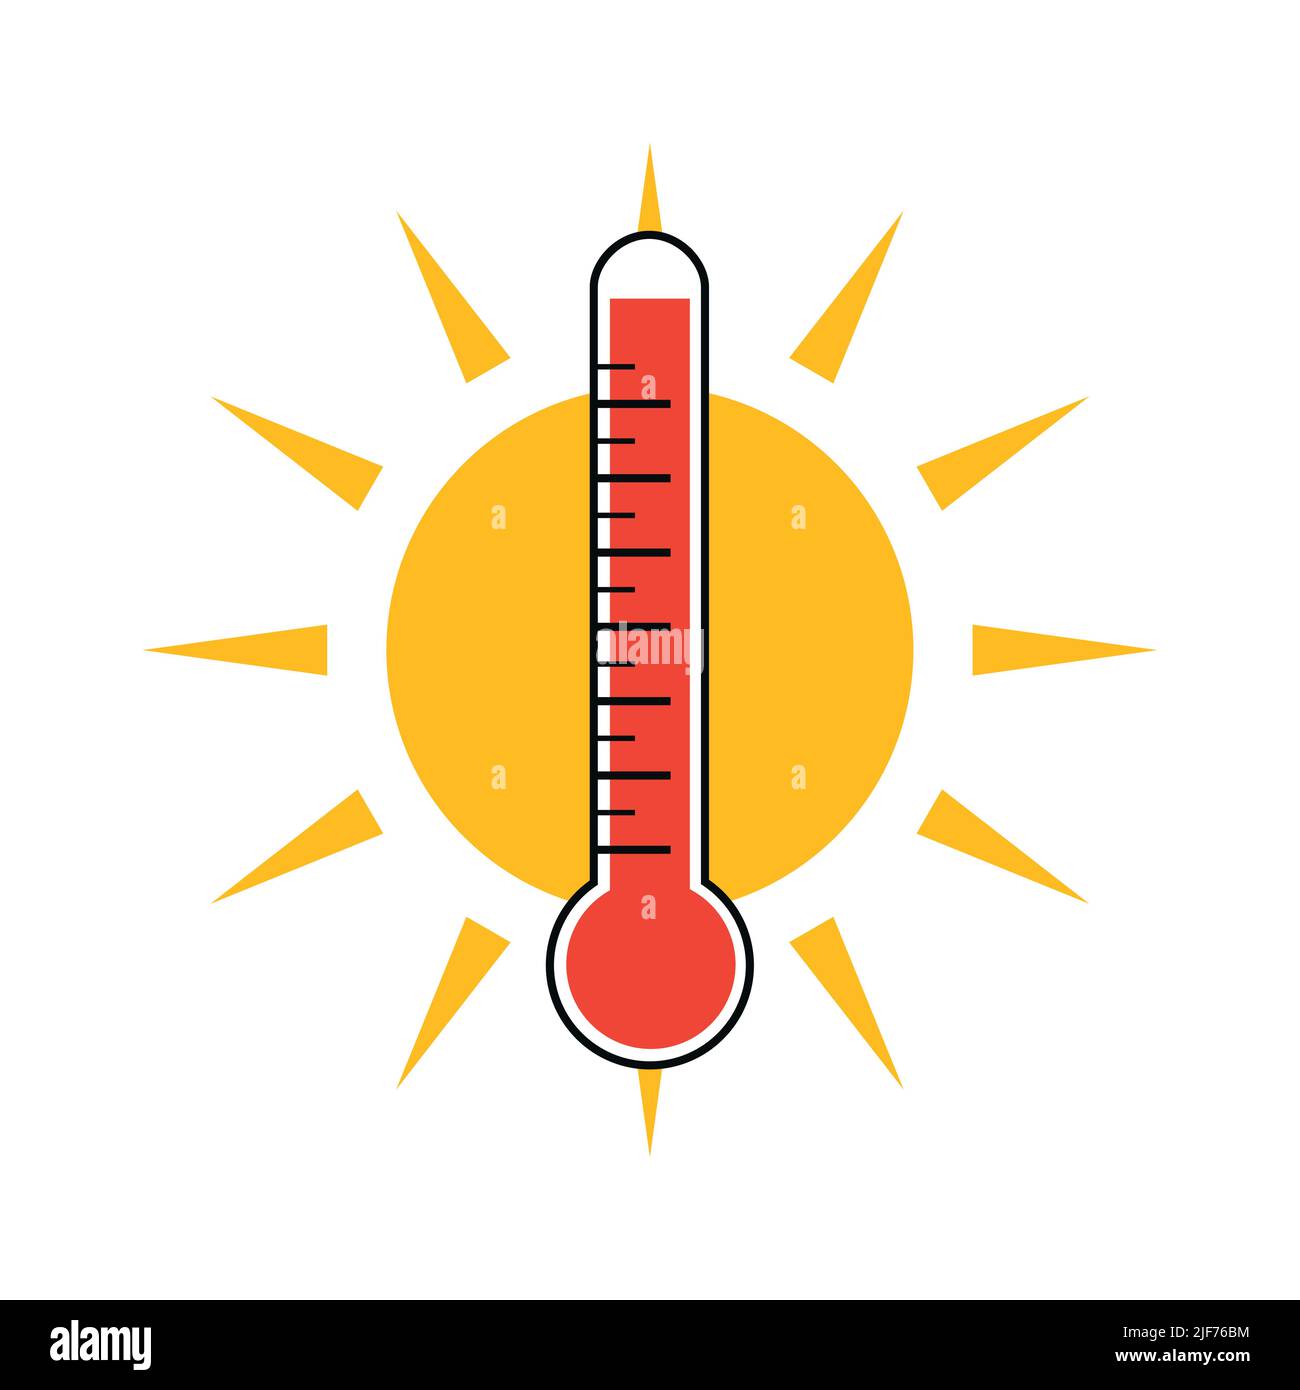 heat thermometer icon and sun symbol isolated on white Stock Vector